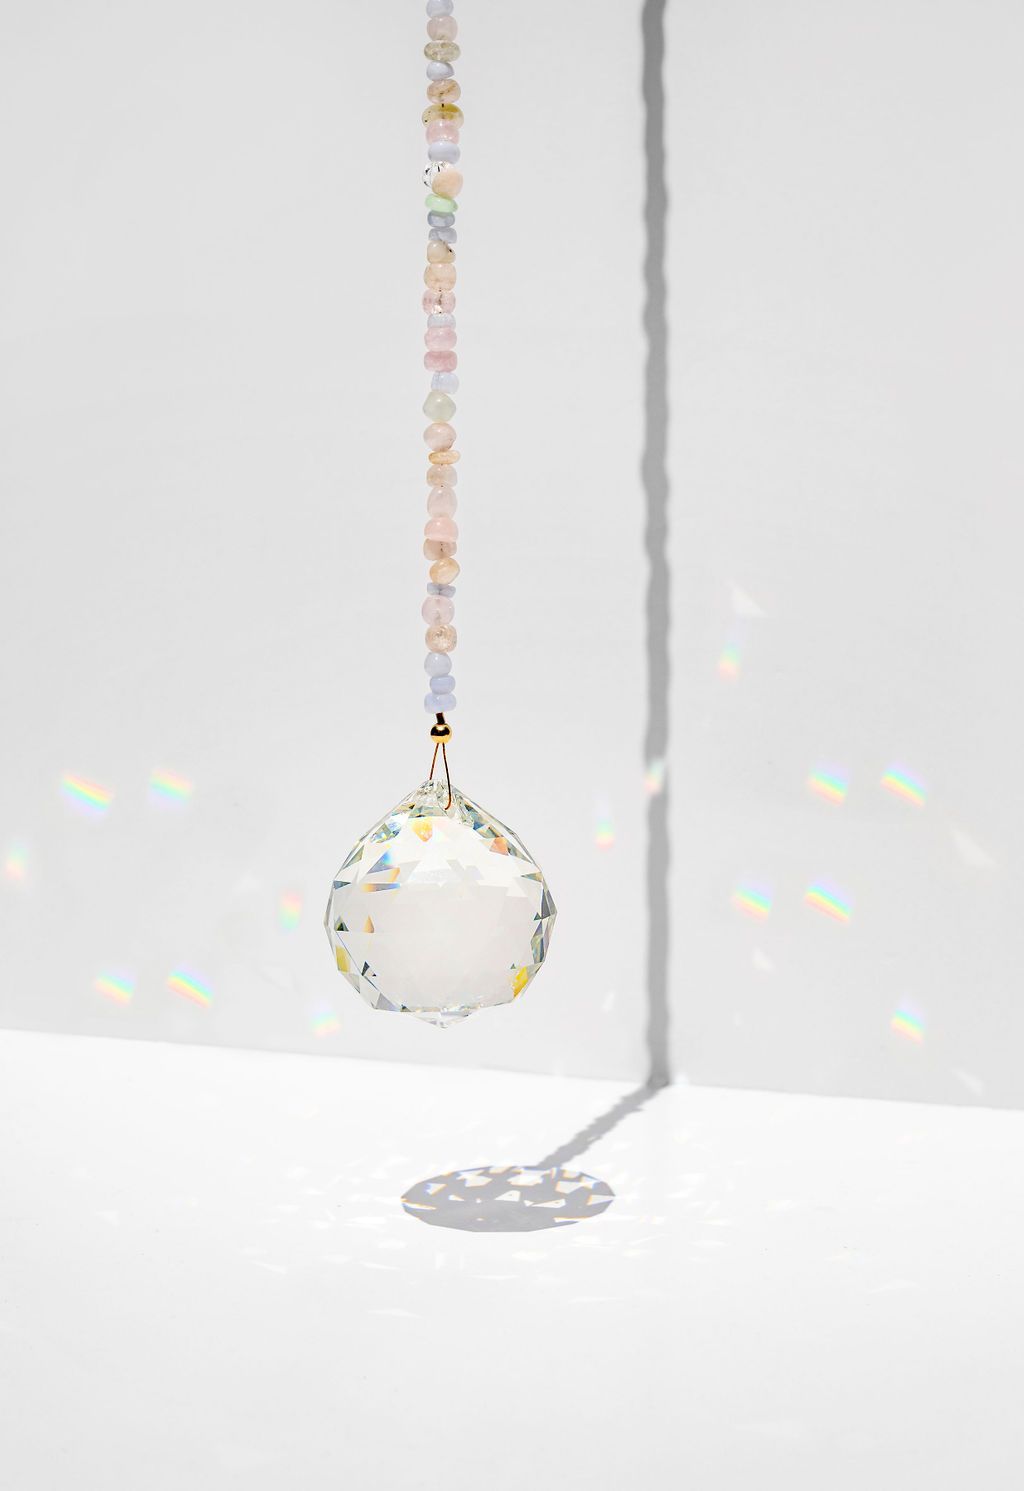 punkwasp by carrie marill window prism - Energize your space with a window prism - hang in a sunny spot & watch the rainbows dance!  Hanging Feng Shui window prisms within the home can balance the energy and activate a stale space :: freshwater pearls for an extra dose of harmony.